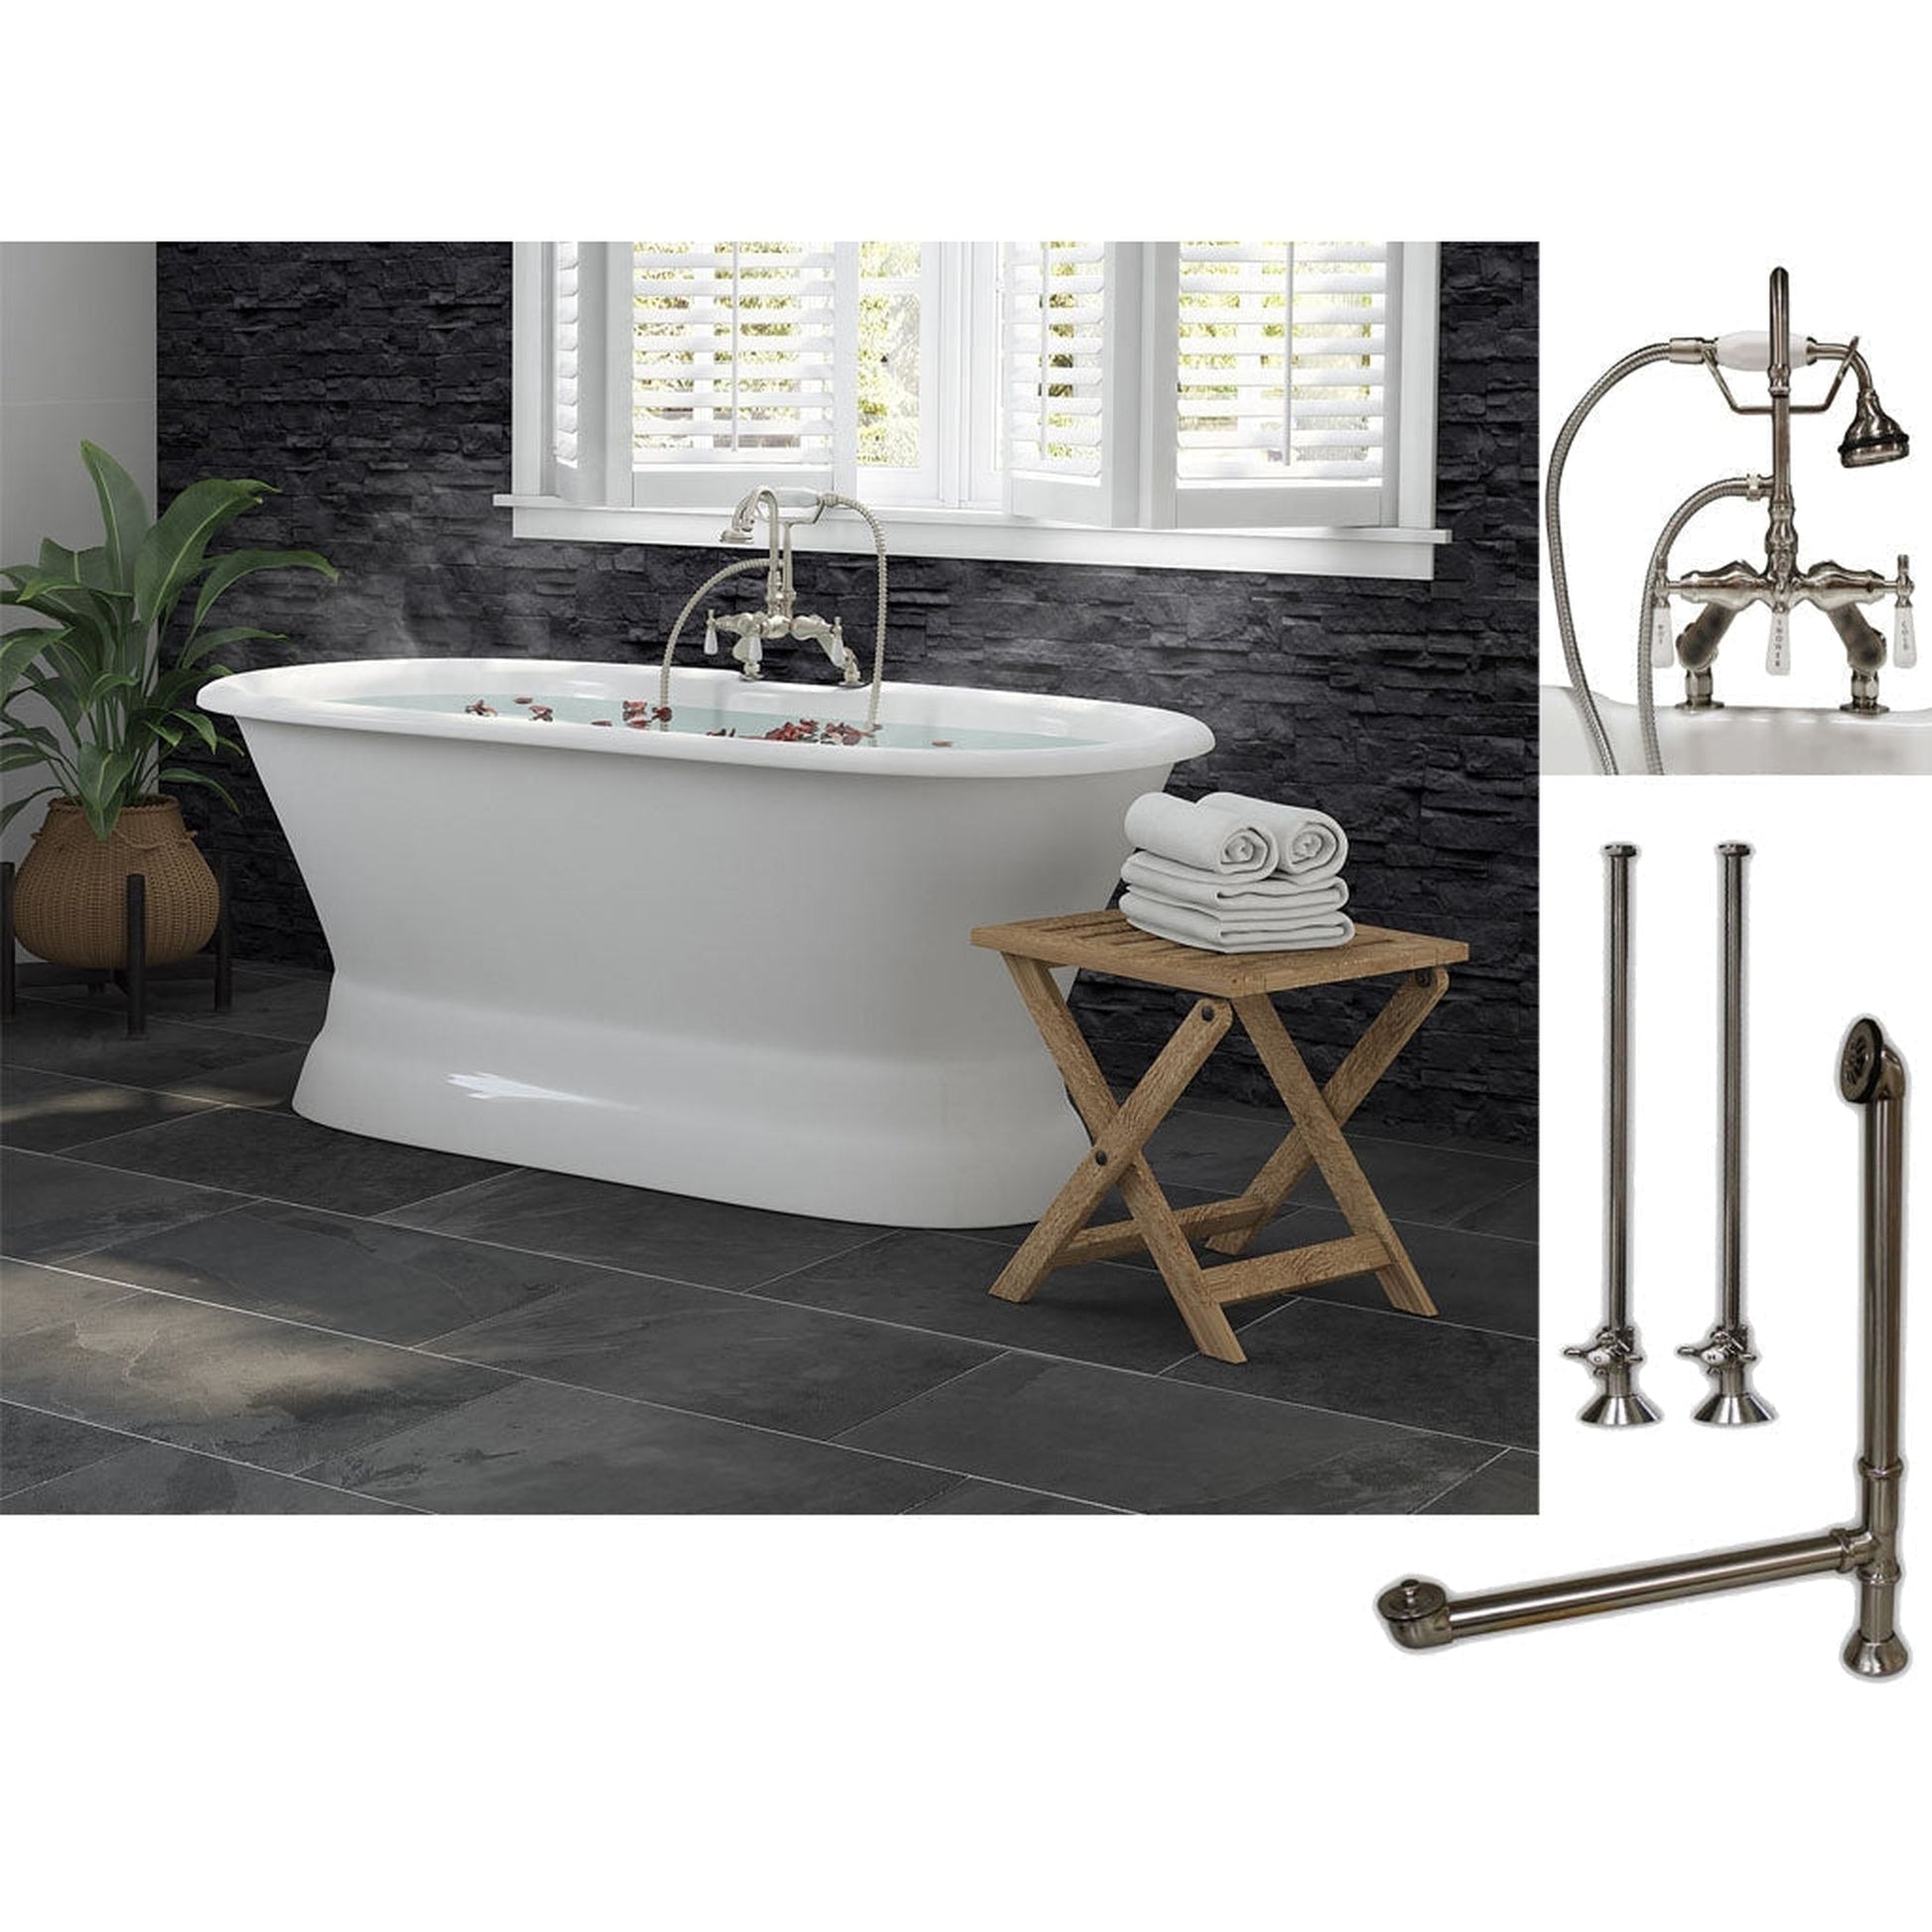 Cambridge Plumbing 66" White Cast Iron Double Ended Pedestal Bathtub With Deck Holes And Complete Plumbing Package Including Porcelain Lever English Telephone Brass Faucet, Supply Lines, Drain And Overflow Assembly In Brushed Nickel